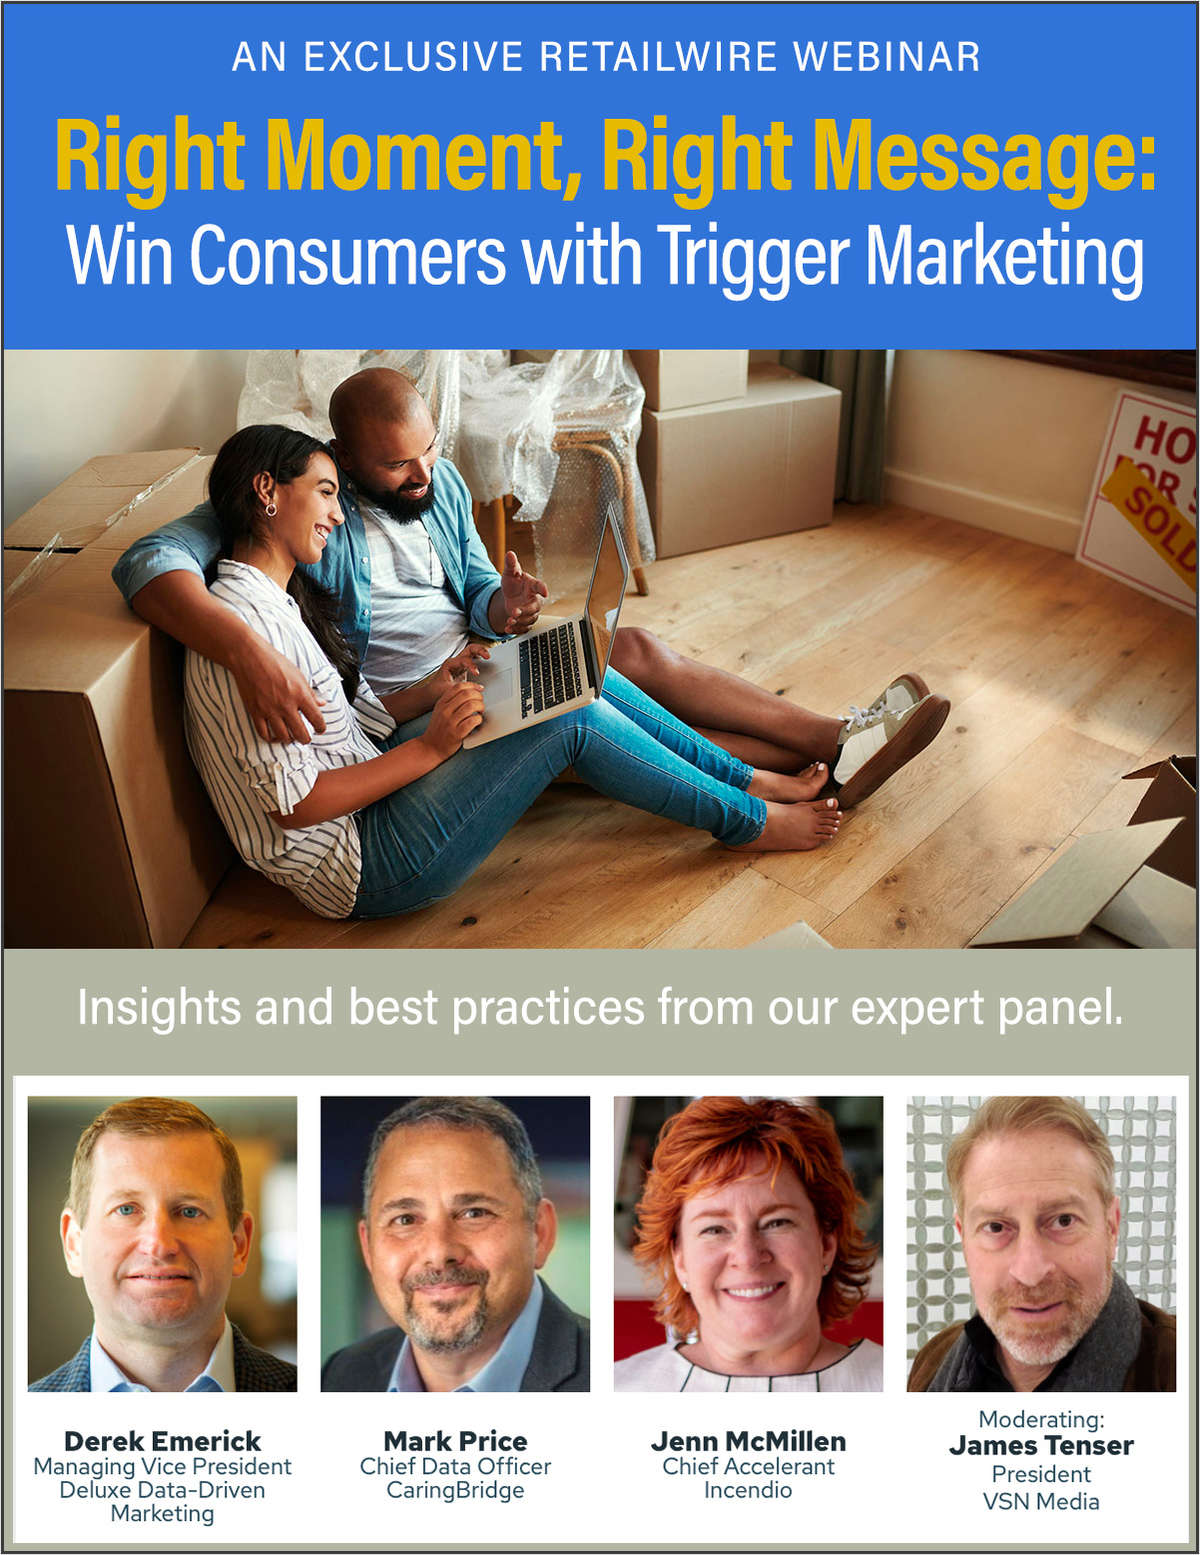 RetailWire Webinar: Right Moment, Right Message -- Win Consumers with Trigger Marketing